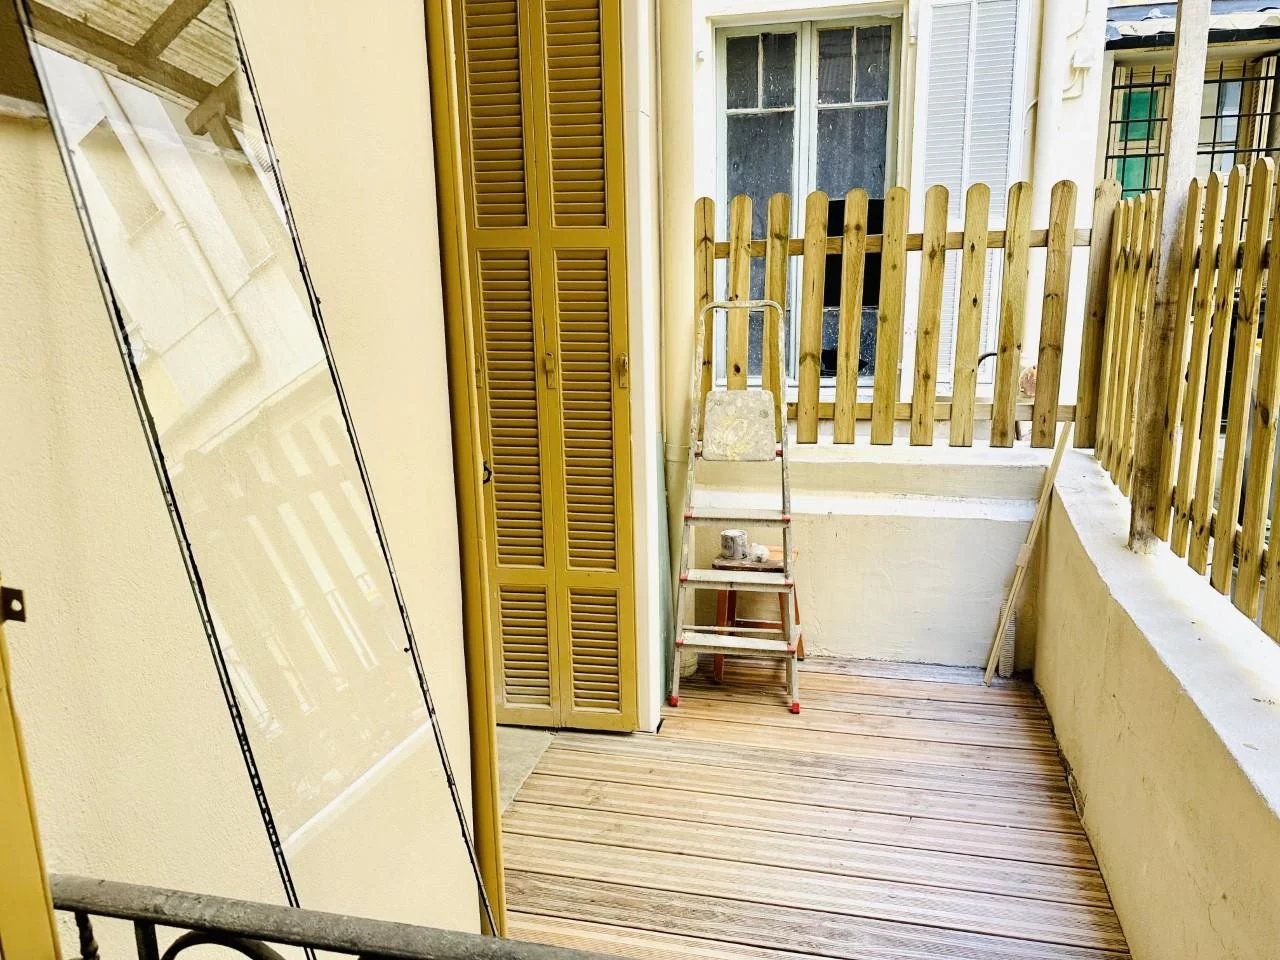 Appartement  3 Rooms 44.48m2  for sale   200 000 €